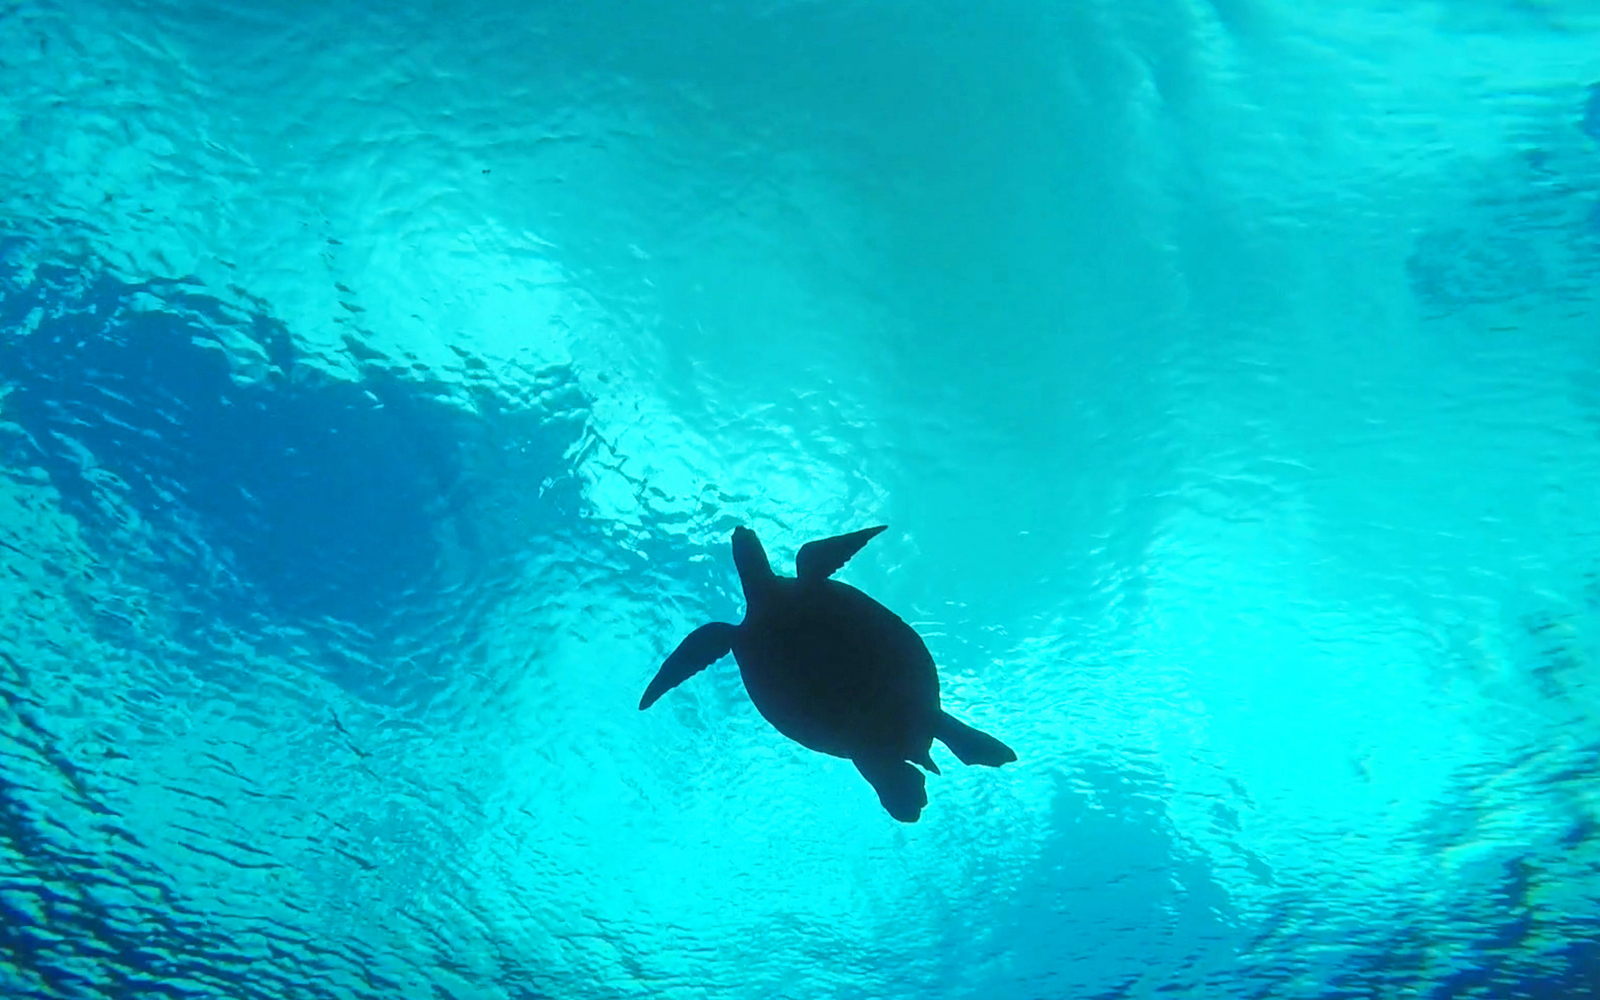 A Guide to Snorkeling With Turtles in Maui